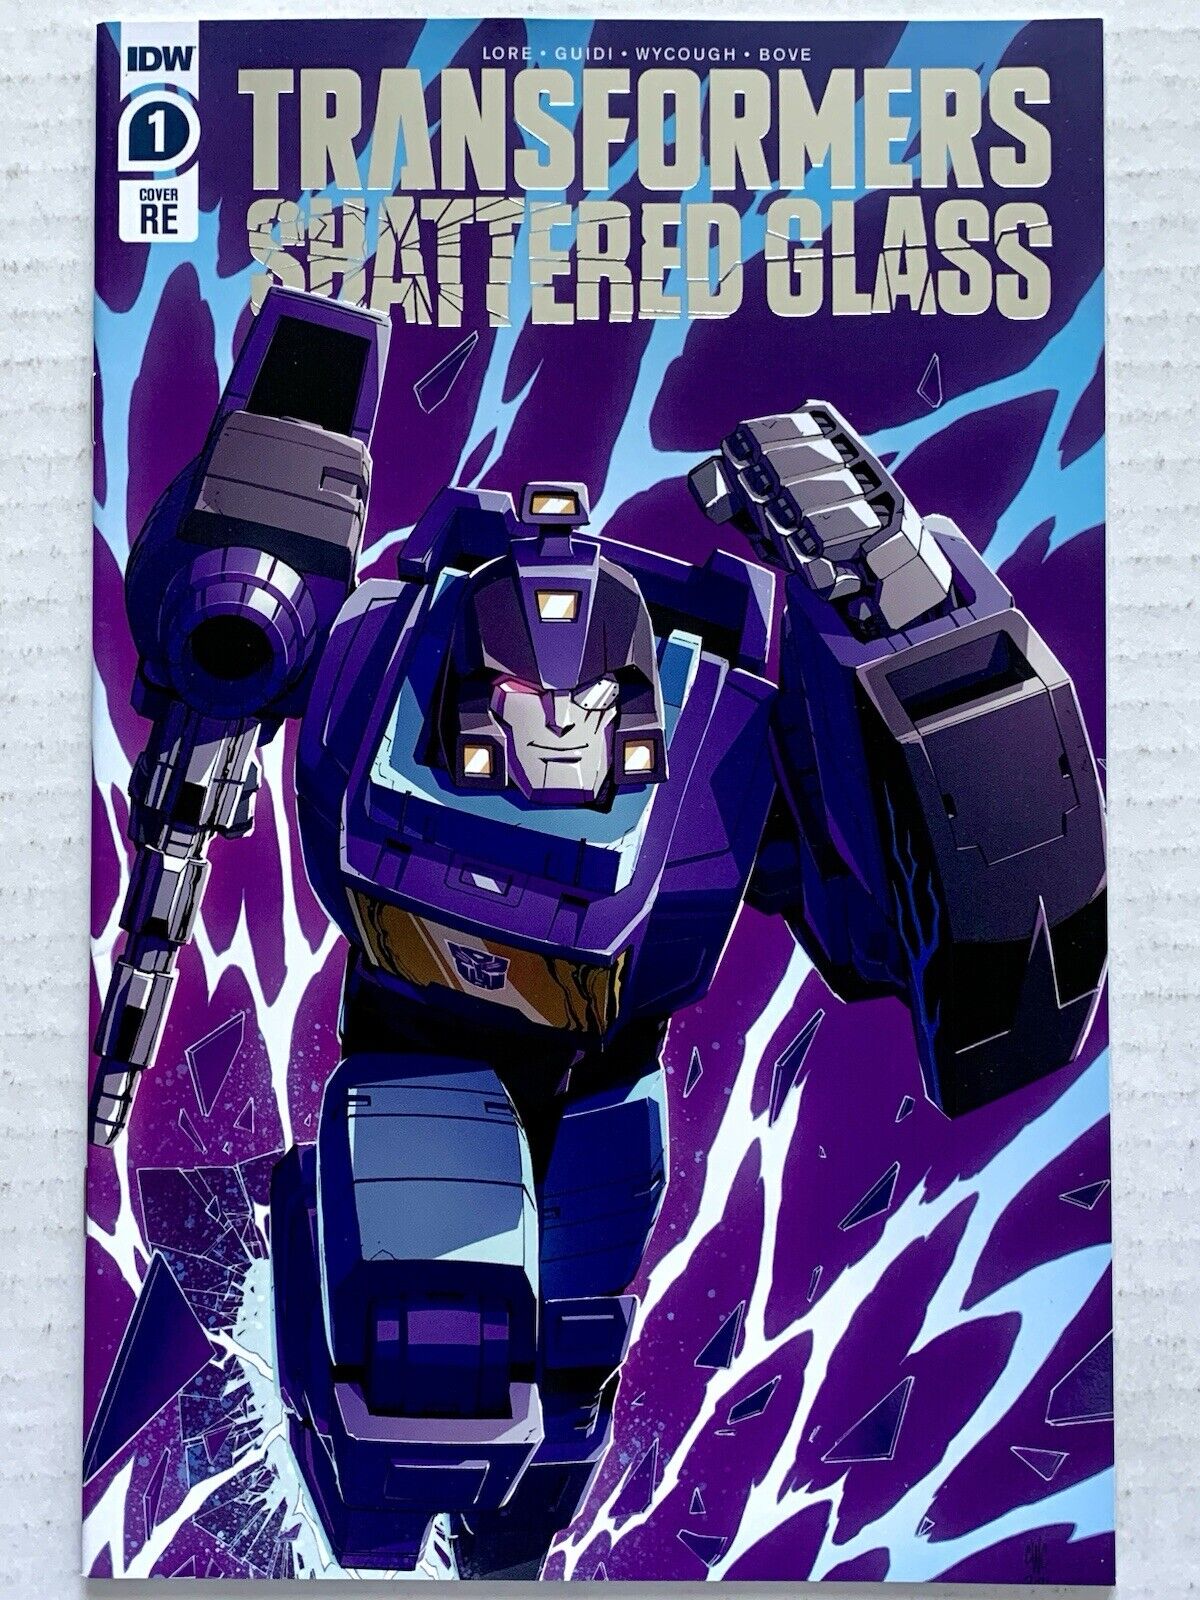 Transformers Shattered Glass #1 RE (2021) IDW- Hasbro Pulse Exclusive (NM/9.4)